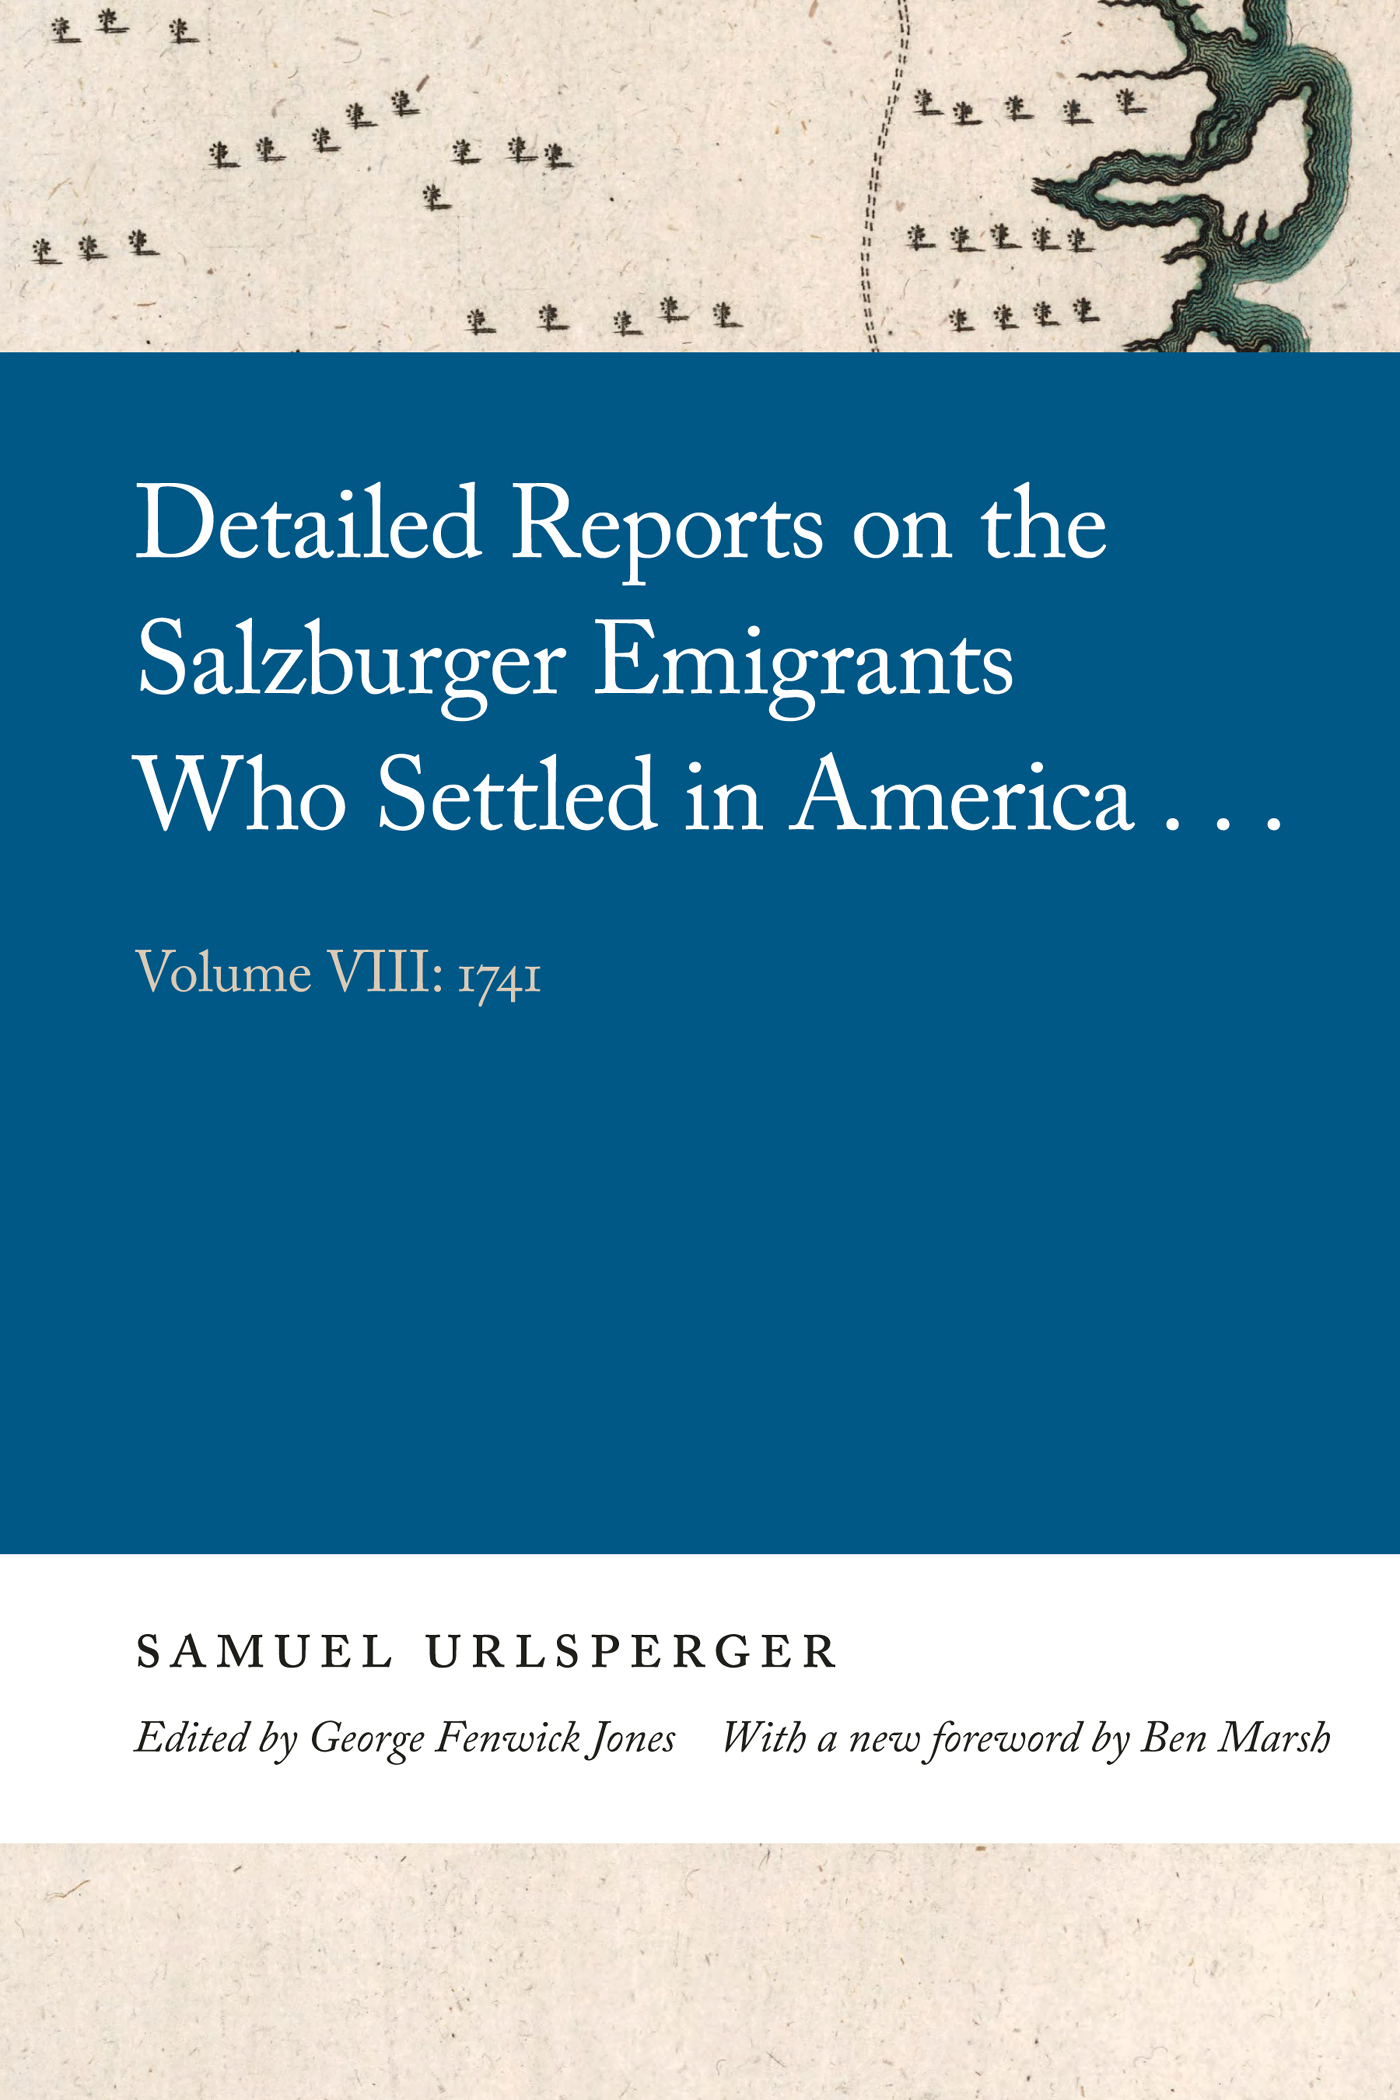 Cover page of, Detailed reports on the Salzburger emigrants who settled in America, volume 8 : 1741.